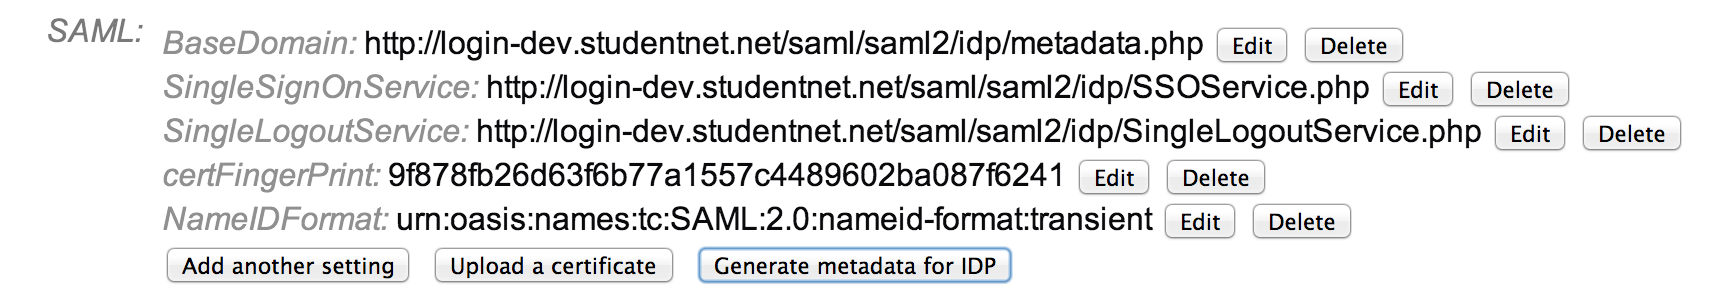 An example of the SAML entries